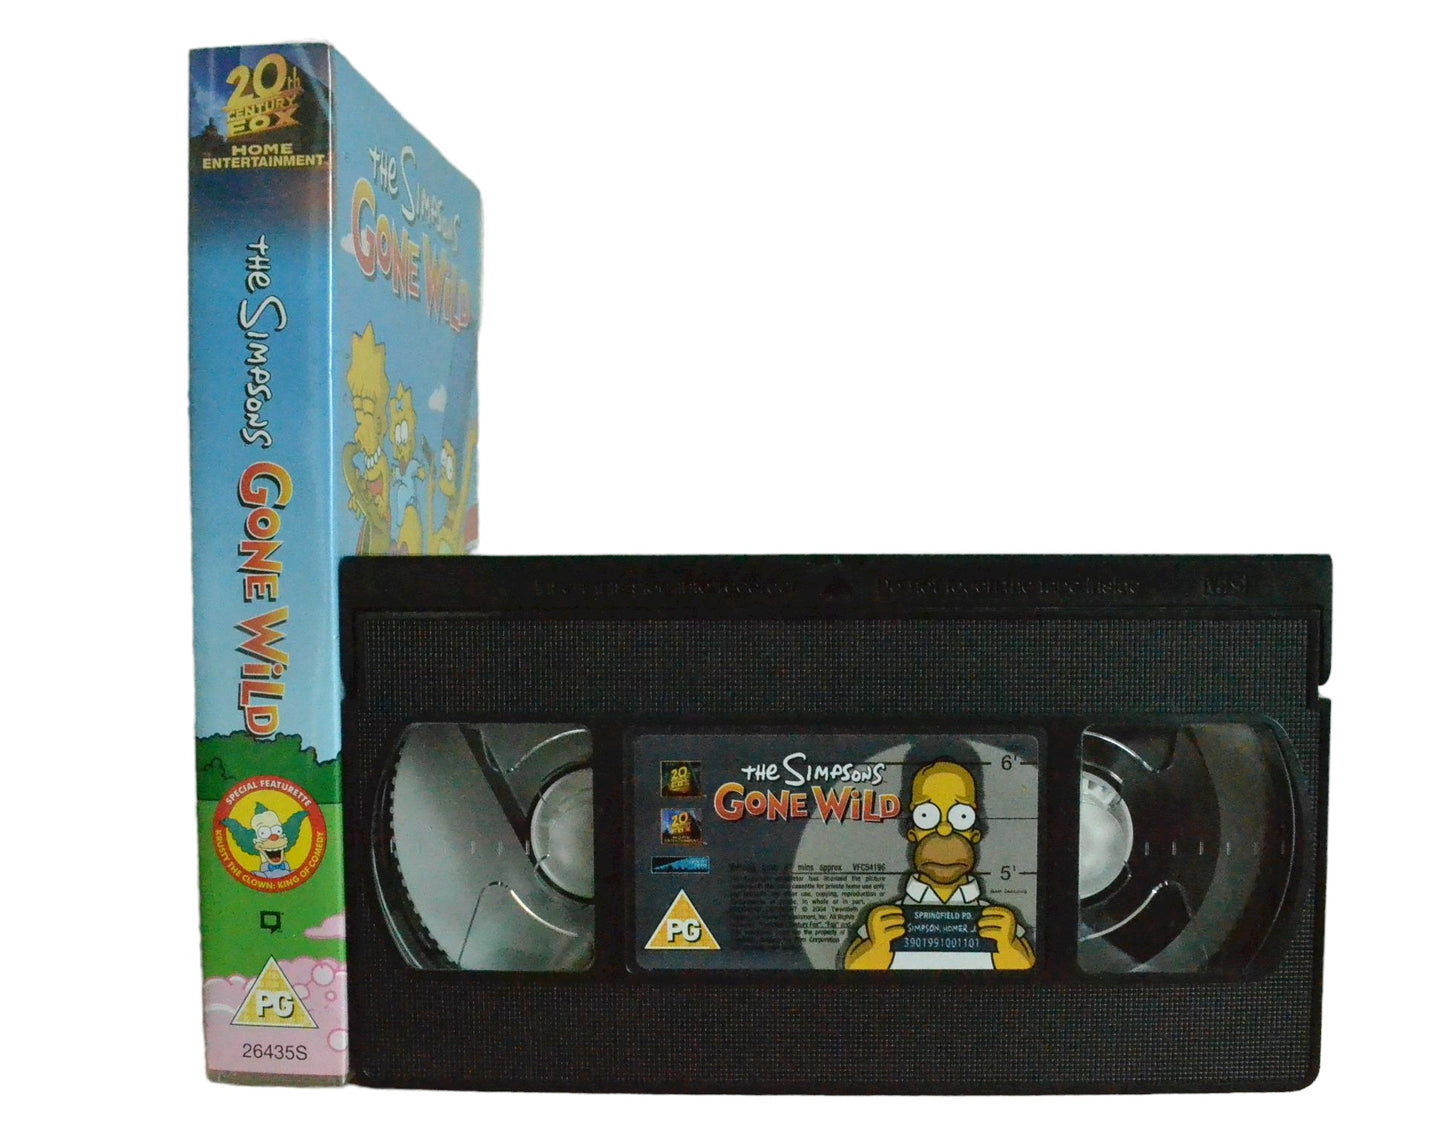 The Simpsons Gone Wild - 20th Century Fox Home Entertainment - Childrens - Pal VHS-